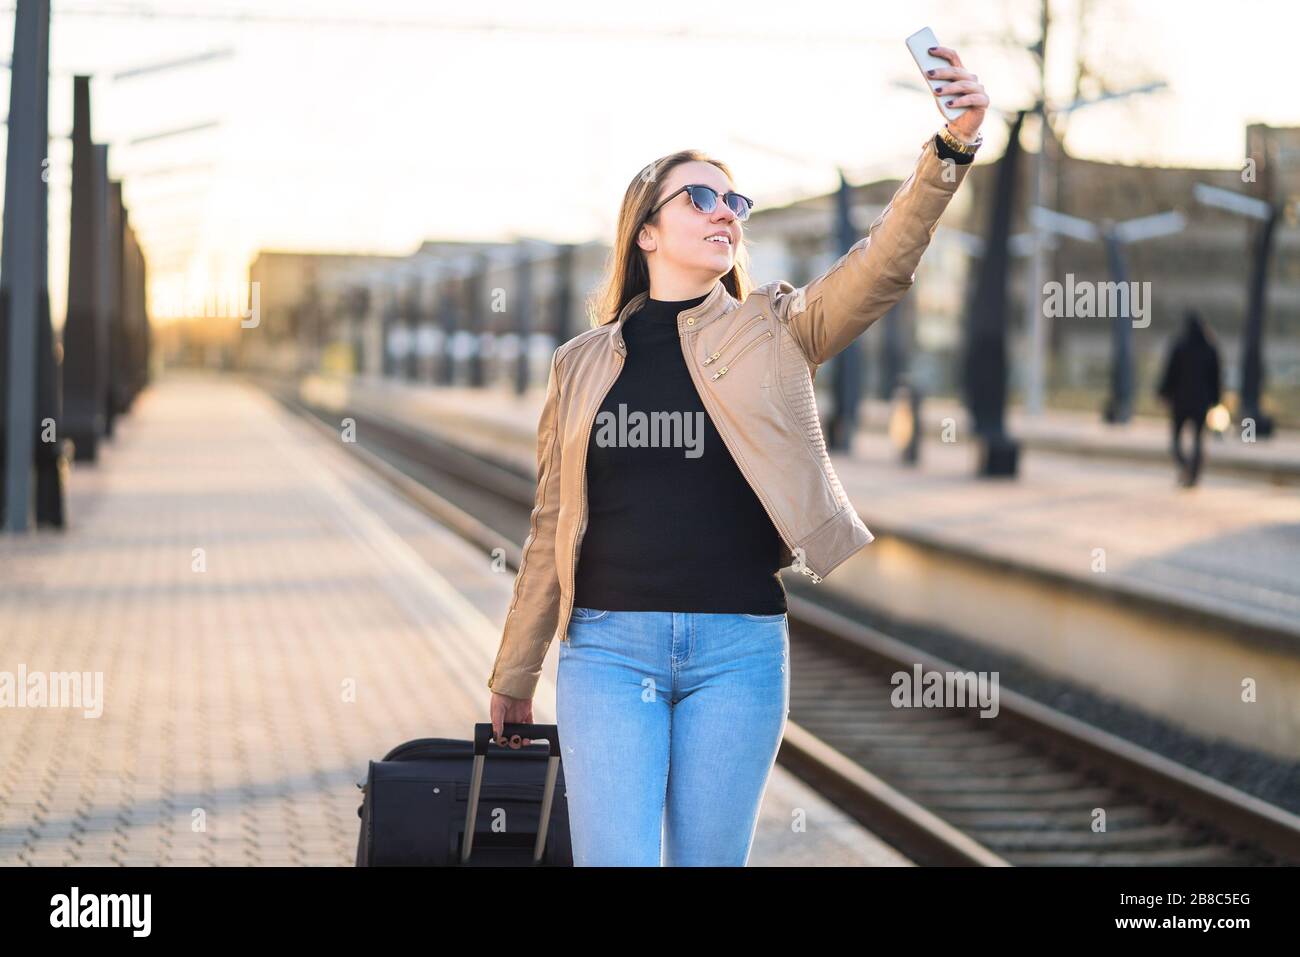 Woman taking selfie with mobile phone in train platform at station. Smiling and happy lady taking photo of herself with smartphone. Stock Photo